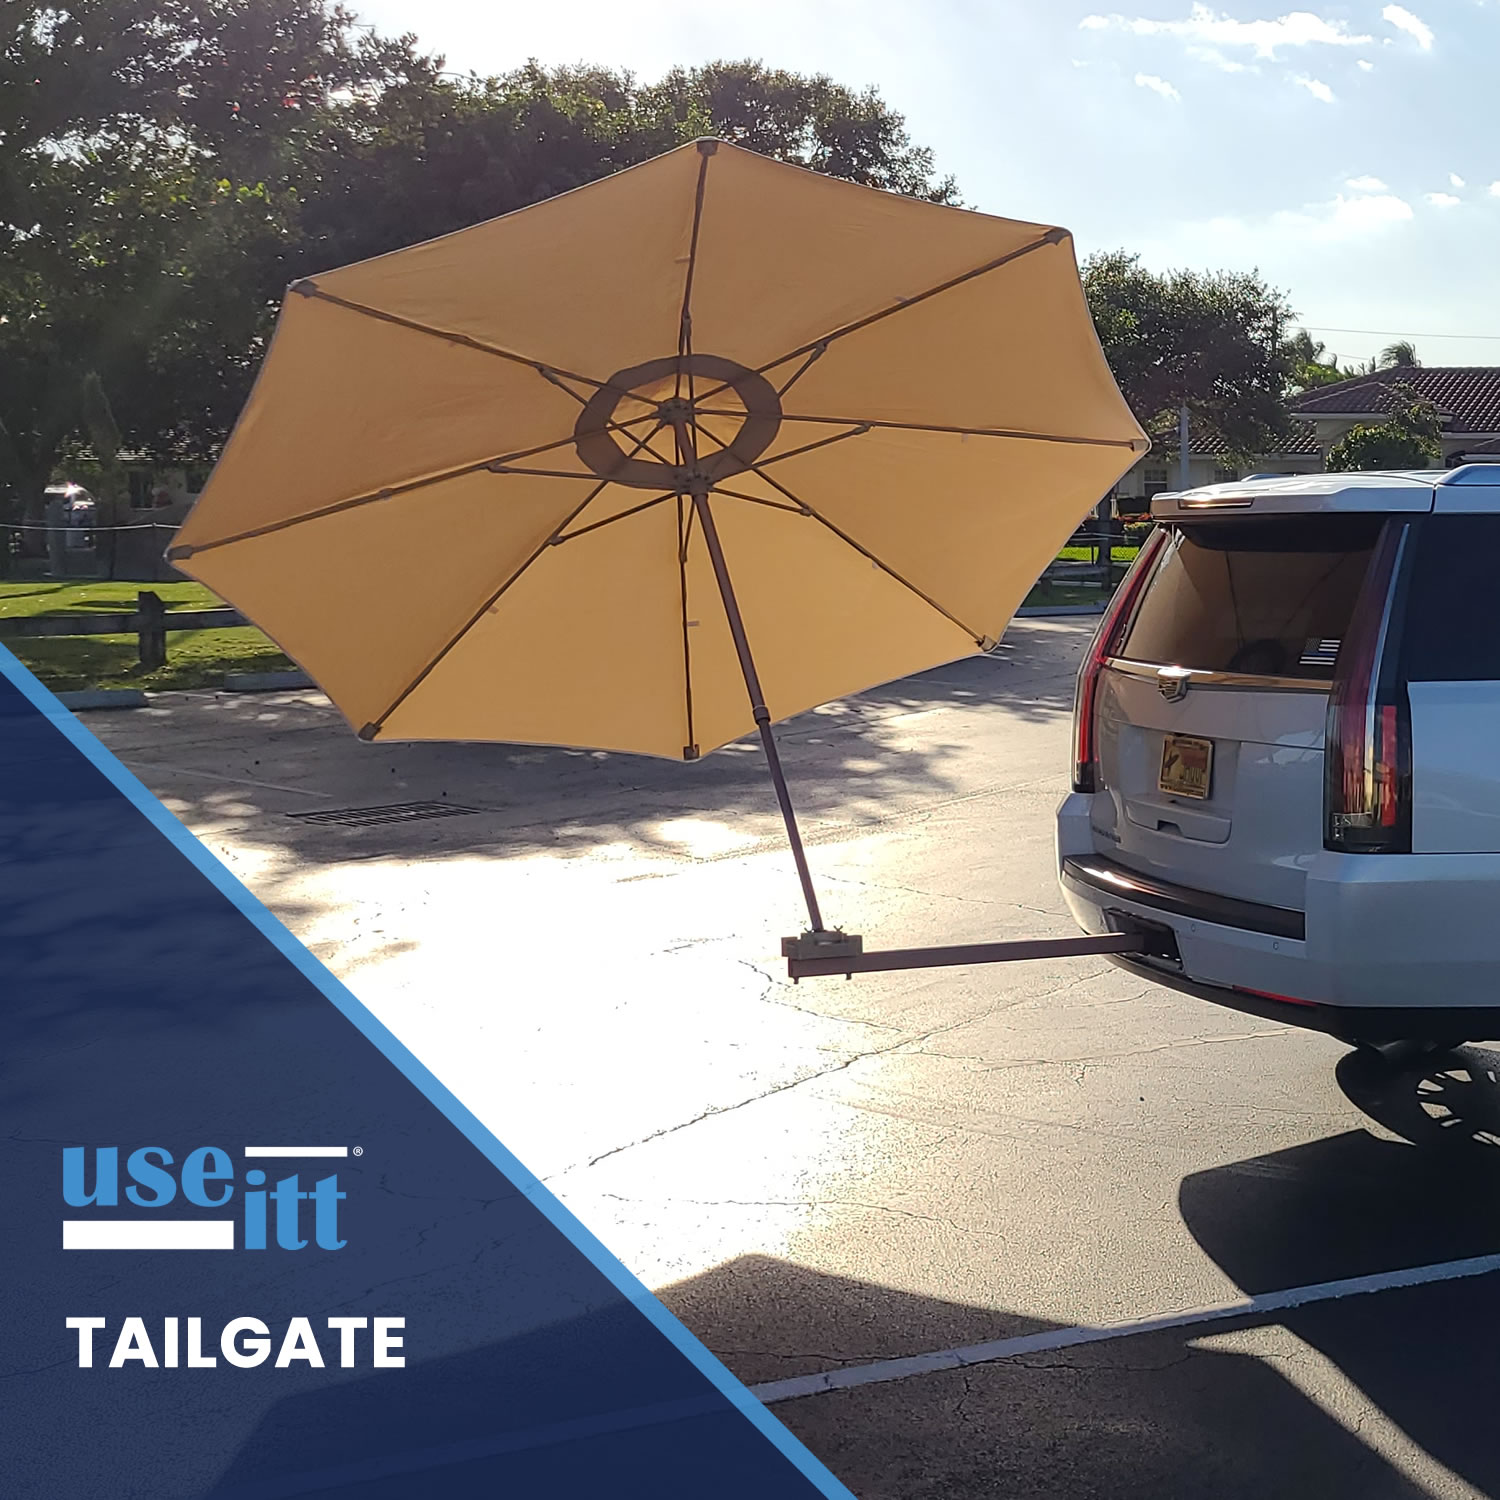 product-useitt-best-umbrella-for-tailgating-1